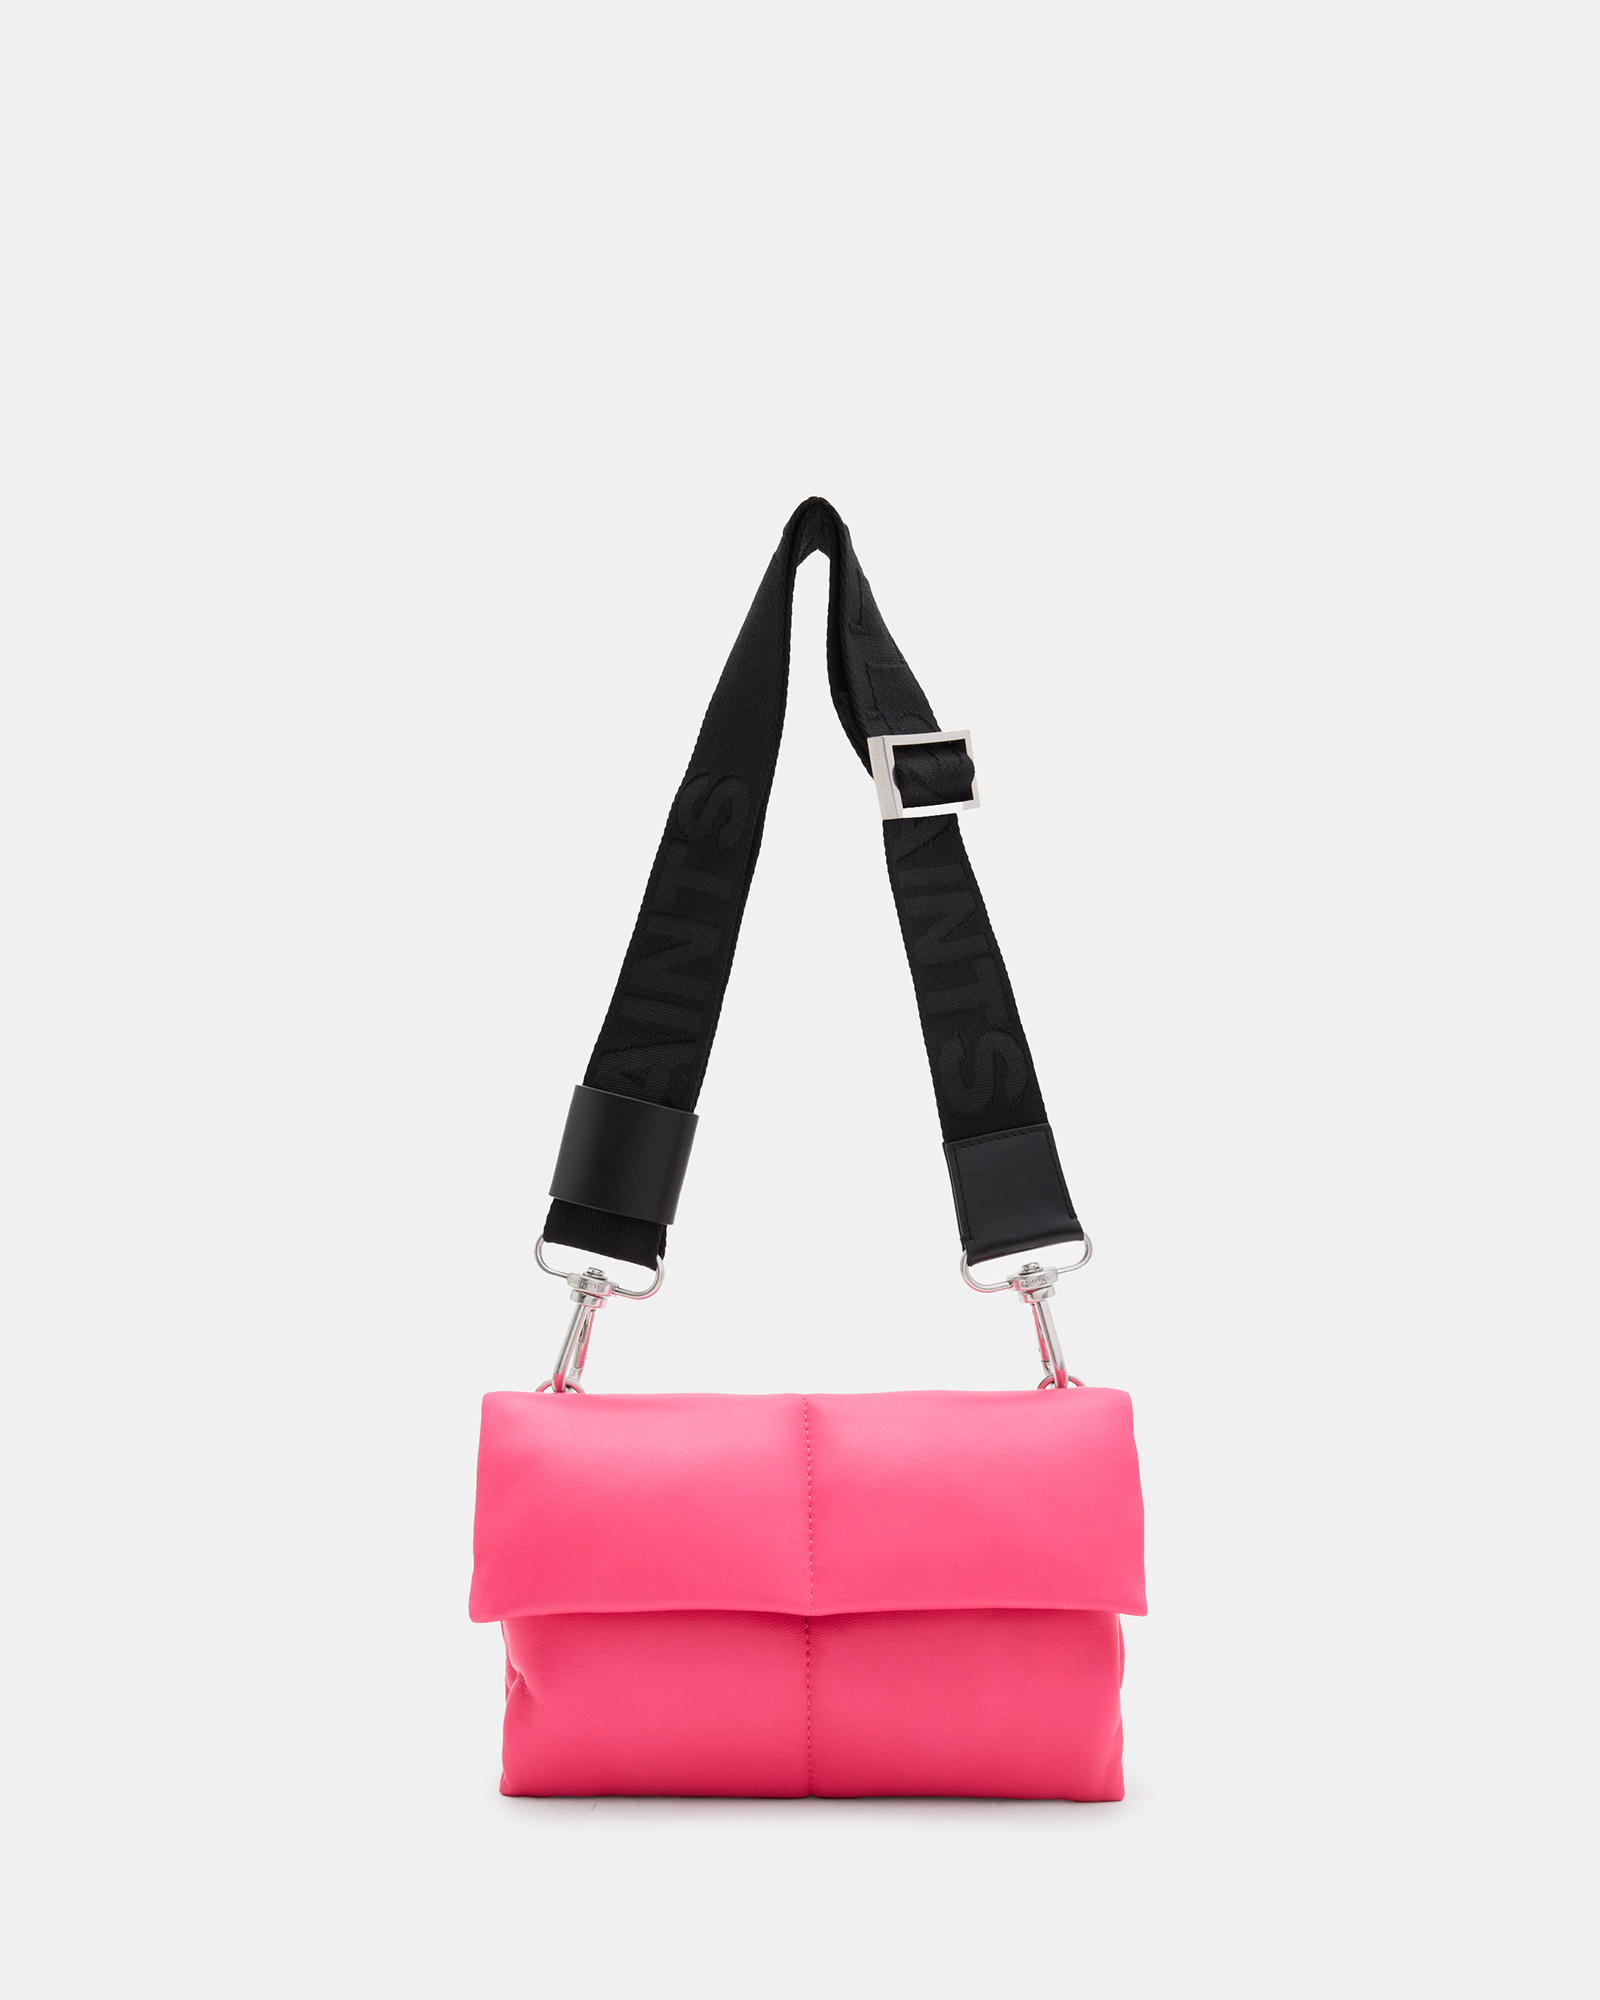 AllSaints Ezra Quilted Leather Crossbody Bag,, Hot Pink